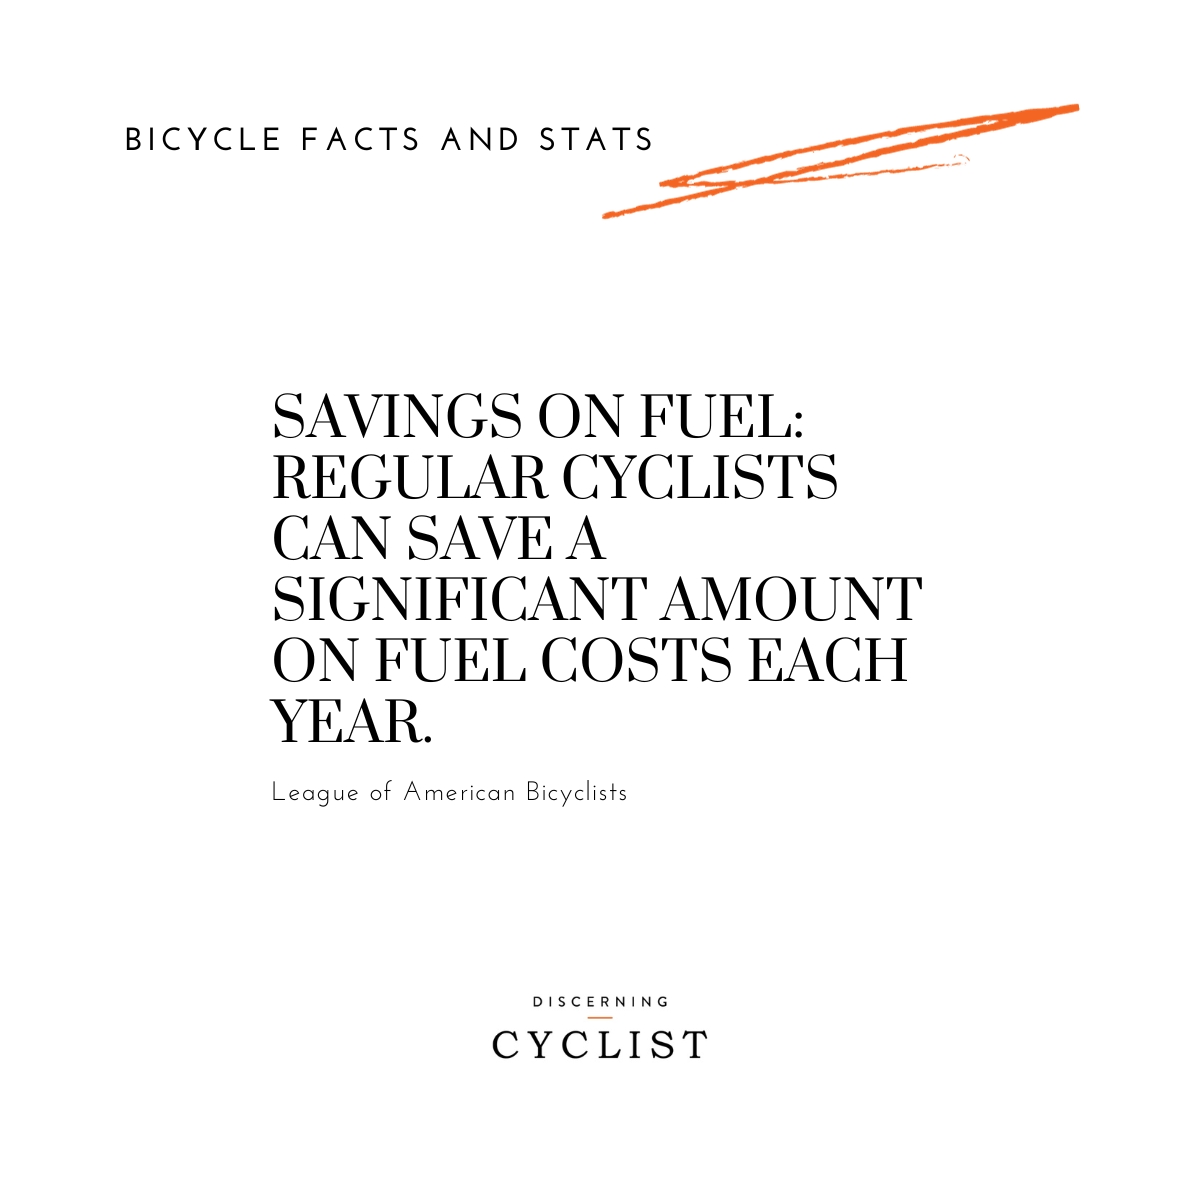 Savings on Fuel: Regular cyclists can save a significant amount on fuel costs each year.